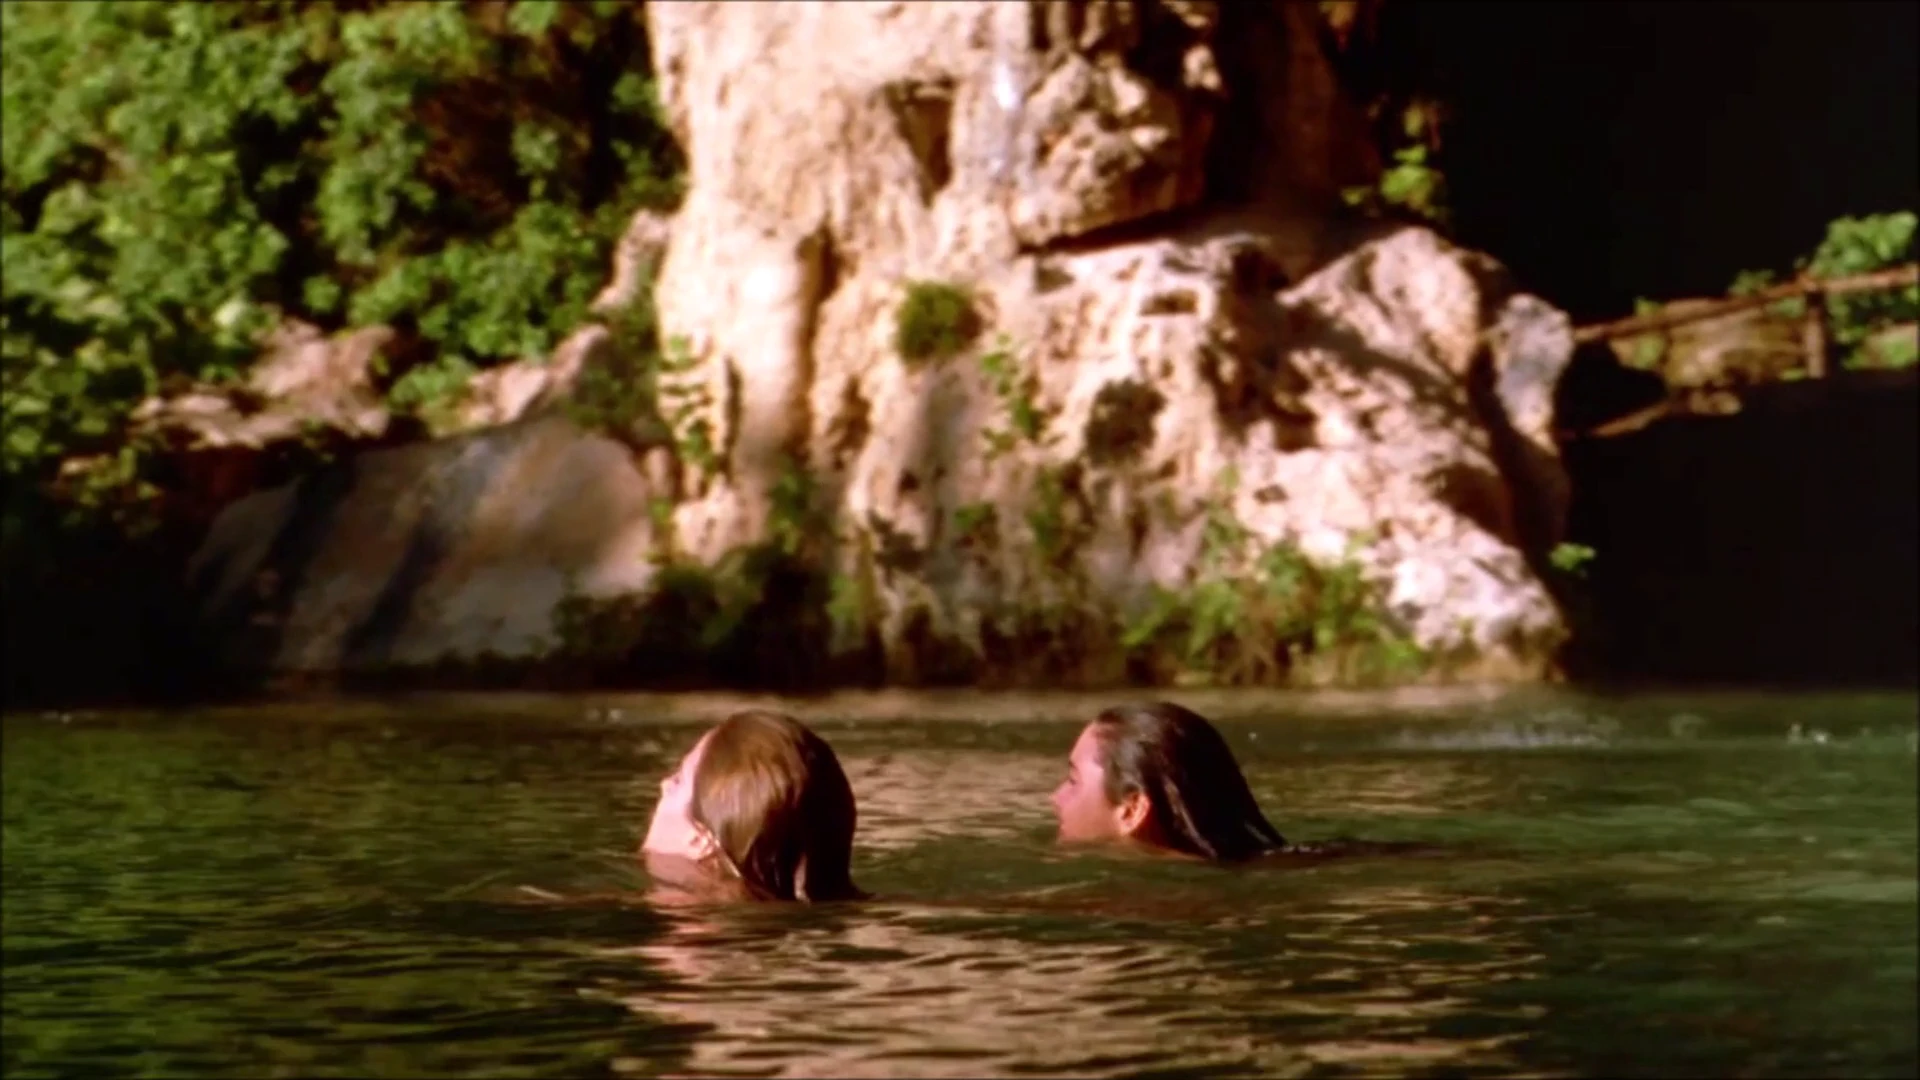 The Hot Spot (1990), R-Rated, Shelley Baker as Jennifer Connelly's body double (ass and rear view of pussy), Jennifer Connelly (boobs) and Debra Cole (boobs and bush)